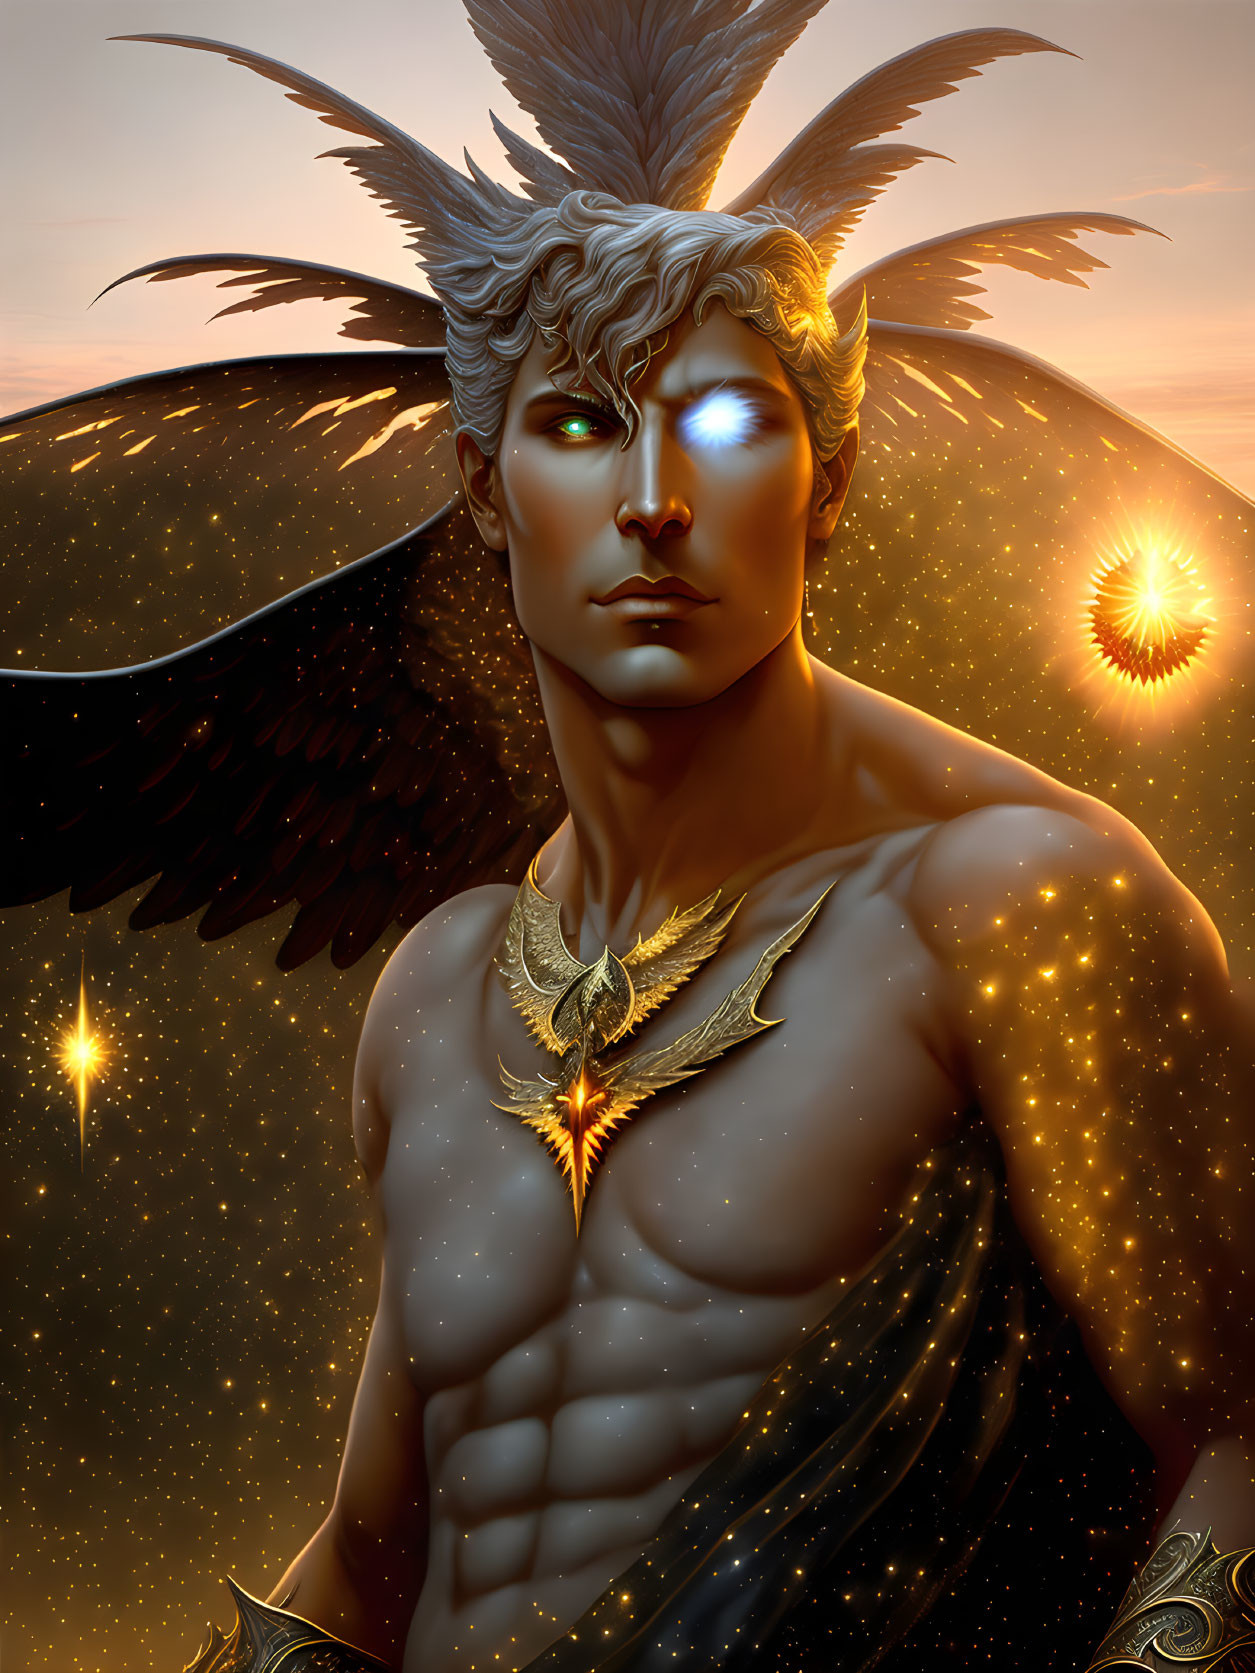 Illustrated figure with wings and glowing eyes against sunrise backdrop